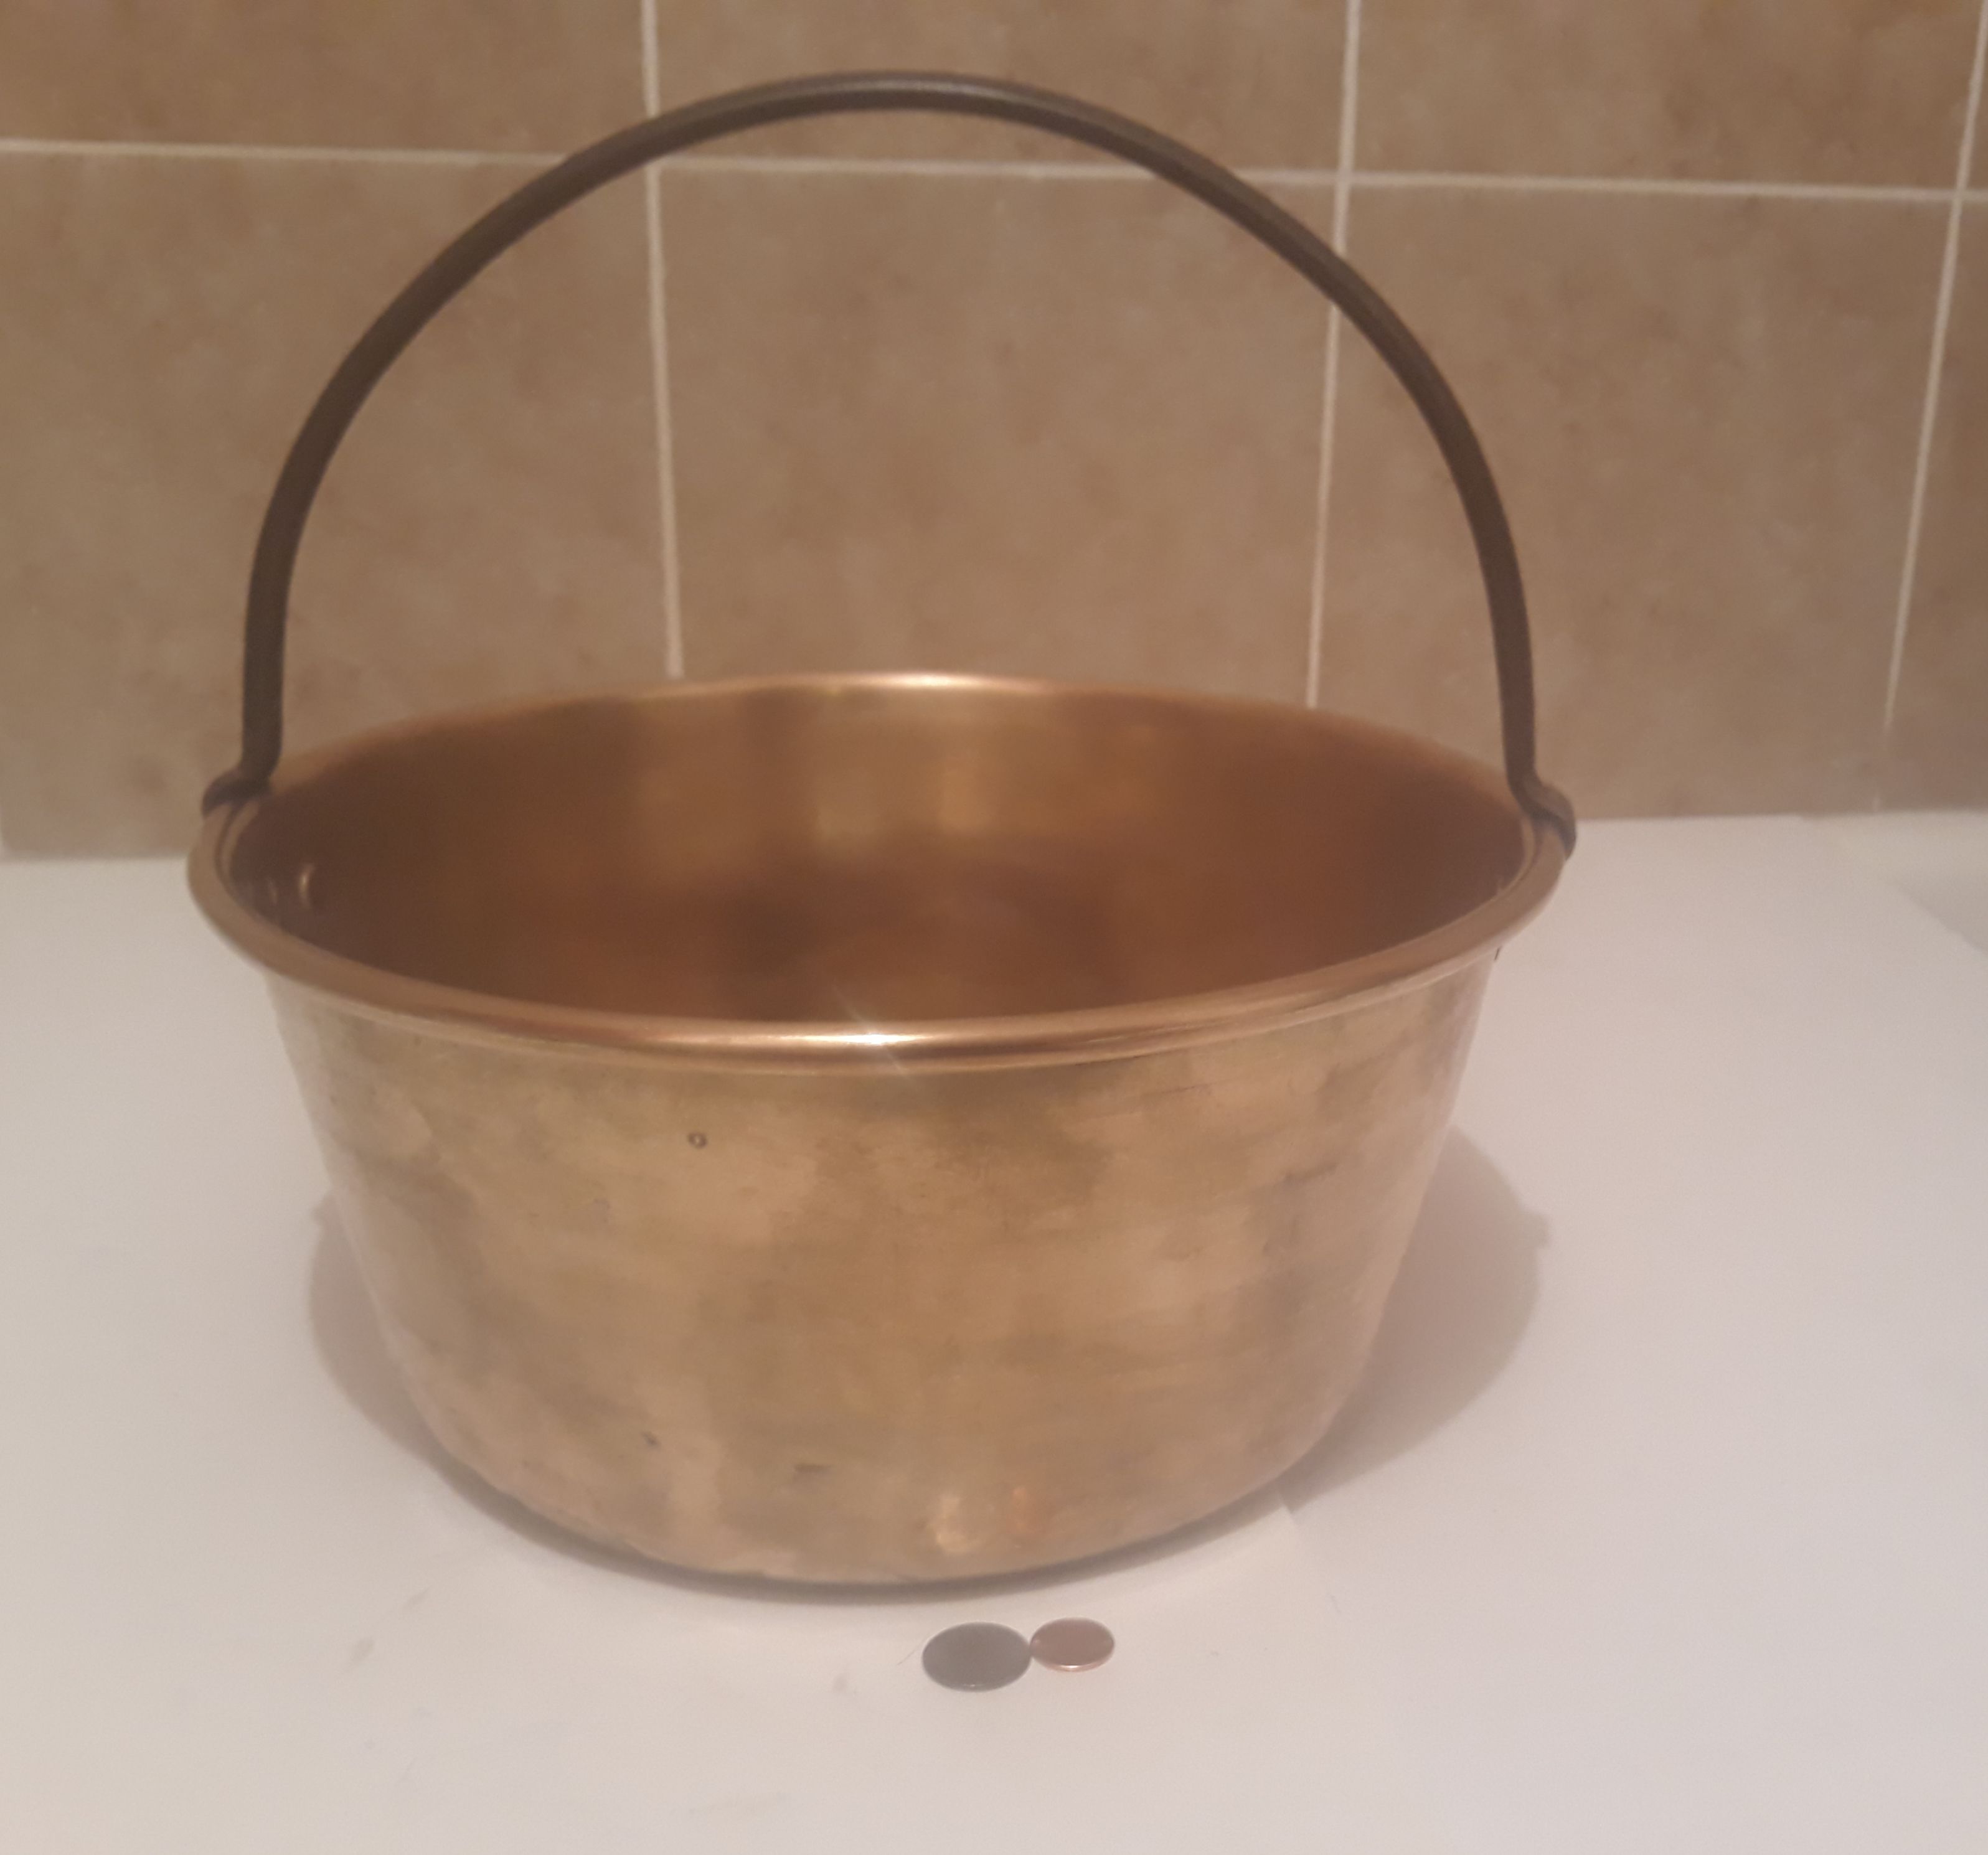 Vintage Metal Brass Cooking Pot, Pan, Heavy Duty, Large Size, 14" x 6" and 12" Tall. Heavy Duty Quality, Kitchen Decor, Table Display, Shelf Display